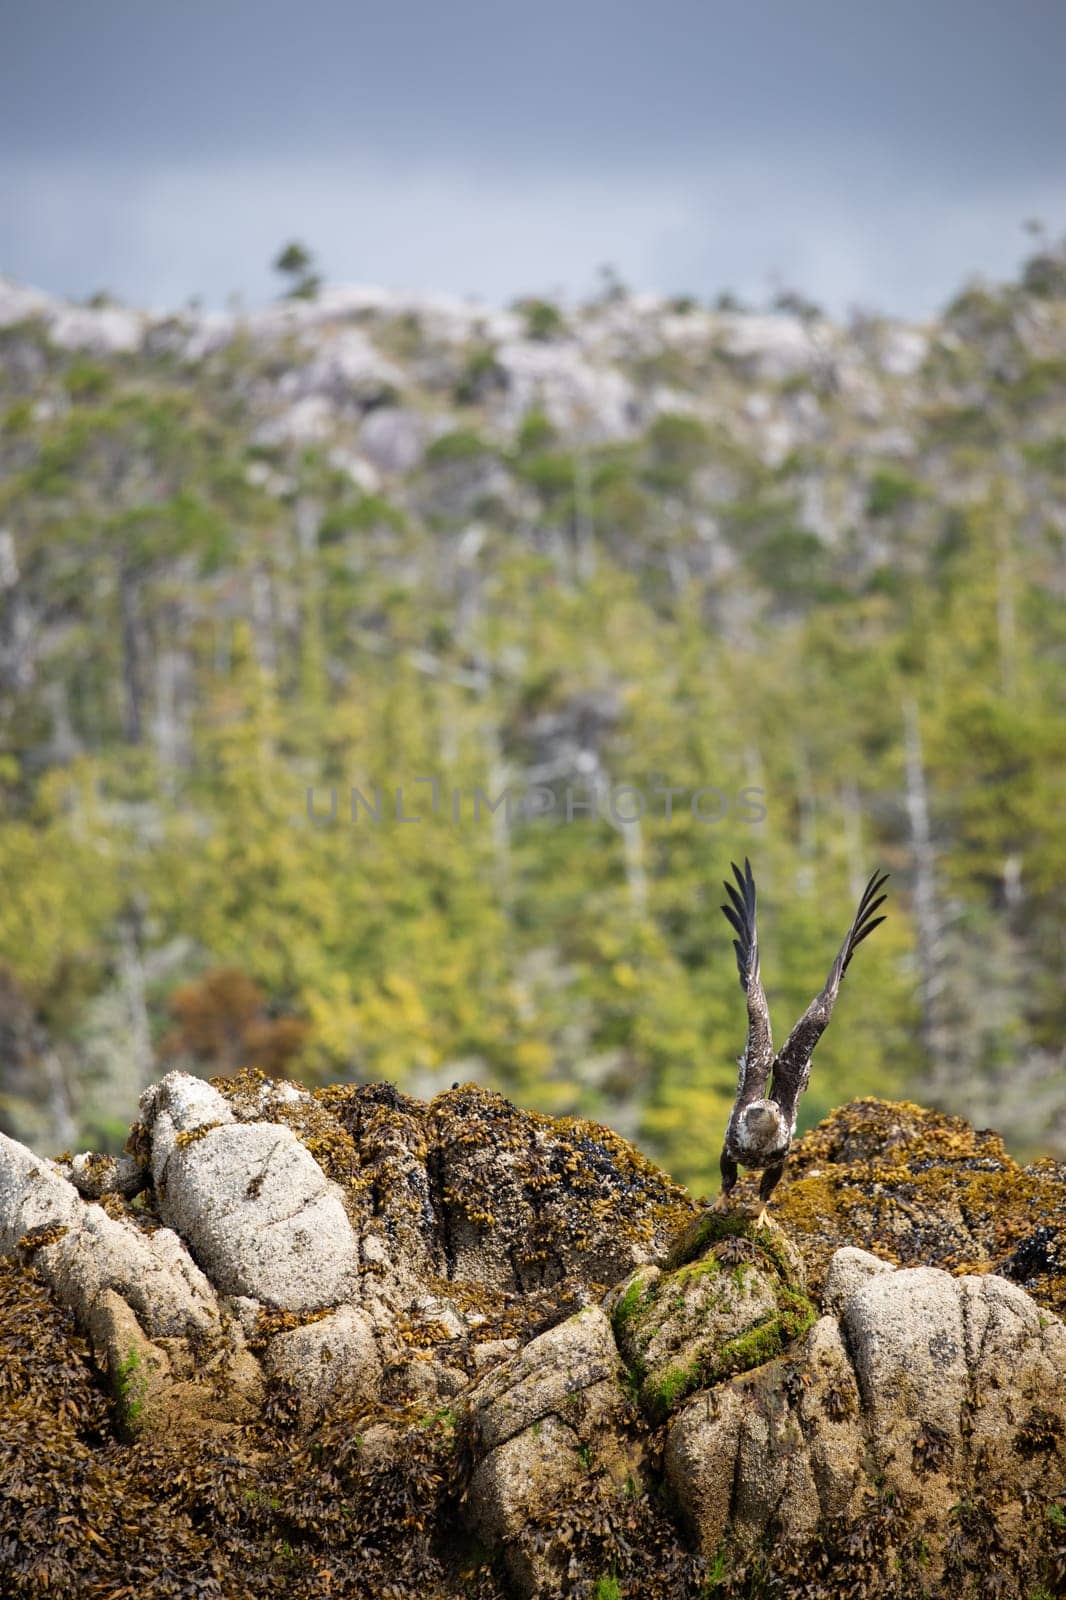 Immature or sub-adult bald eagle with wings spread for takeoff from a rock covered in seaweed by Granchinho